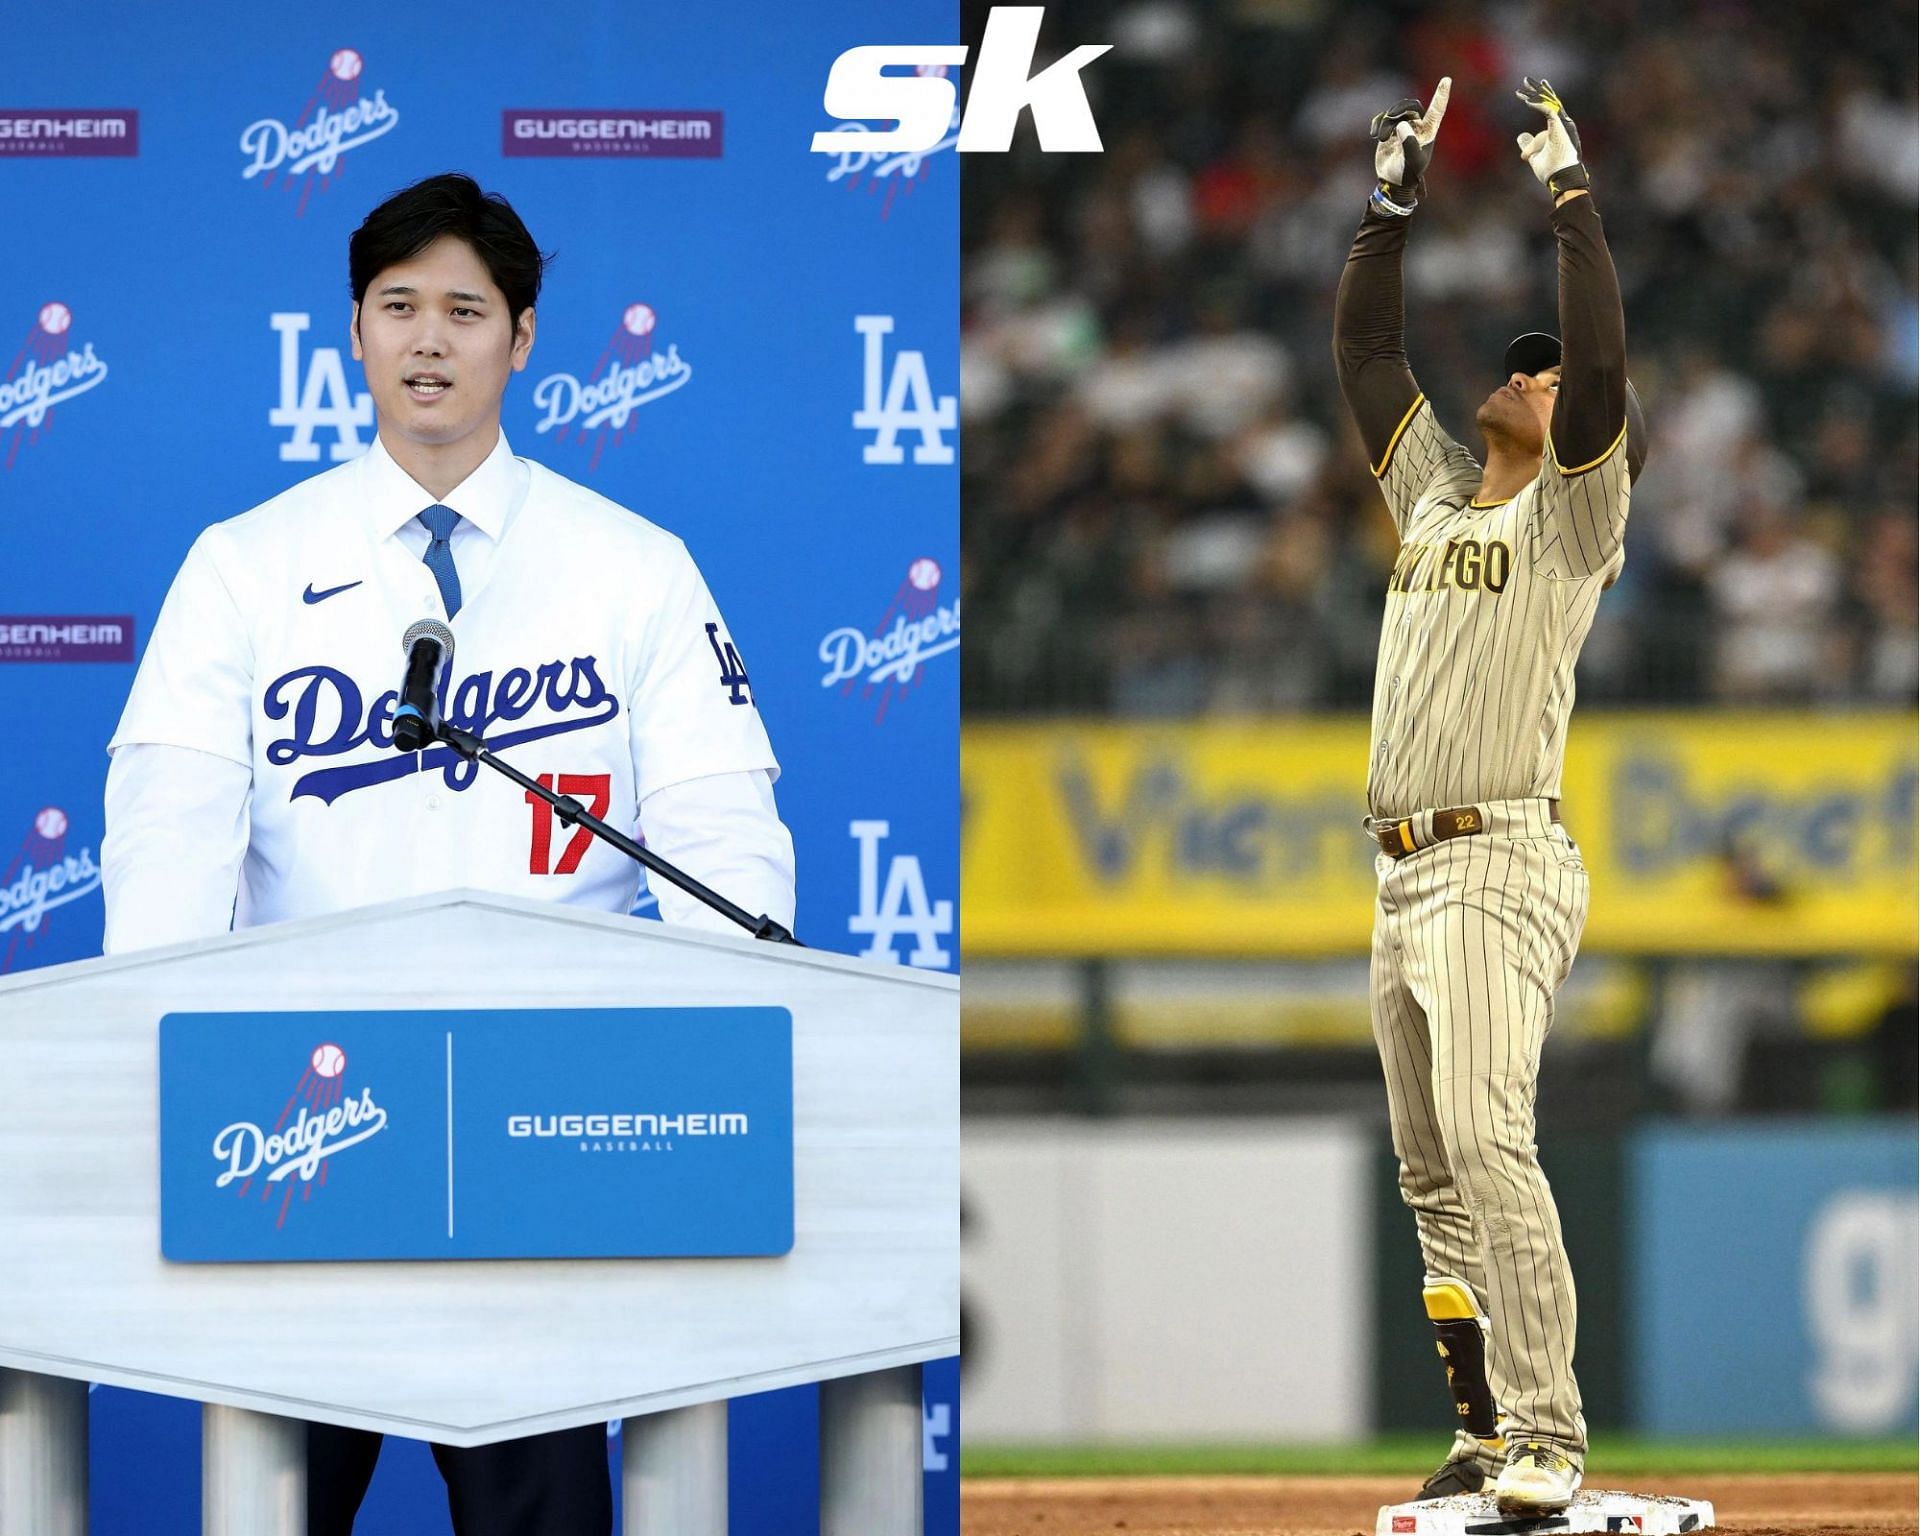 Shohei Ohtani and Juan Soto will play for new teams this year